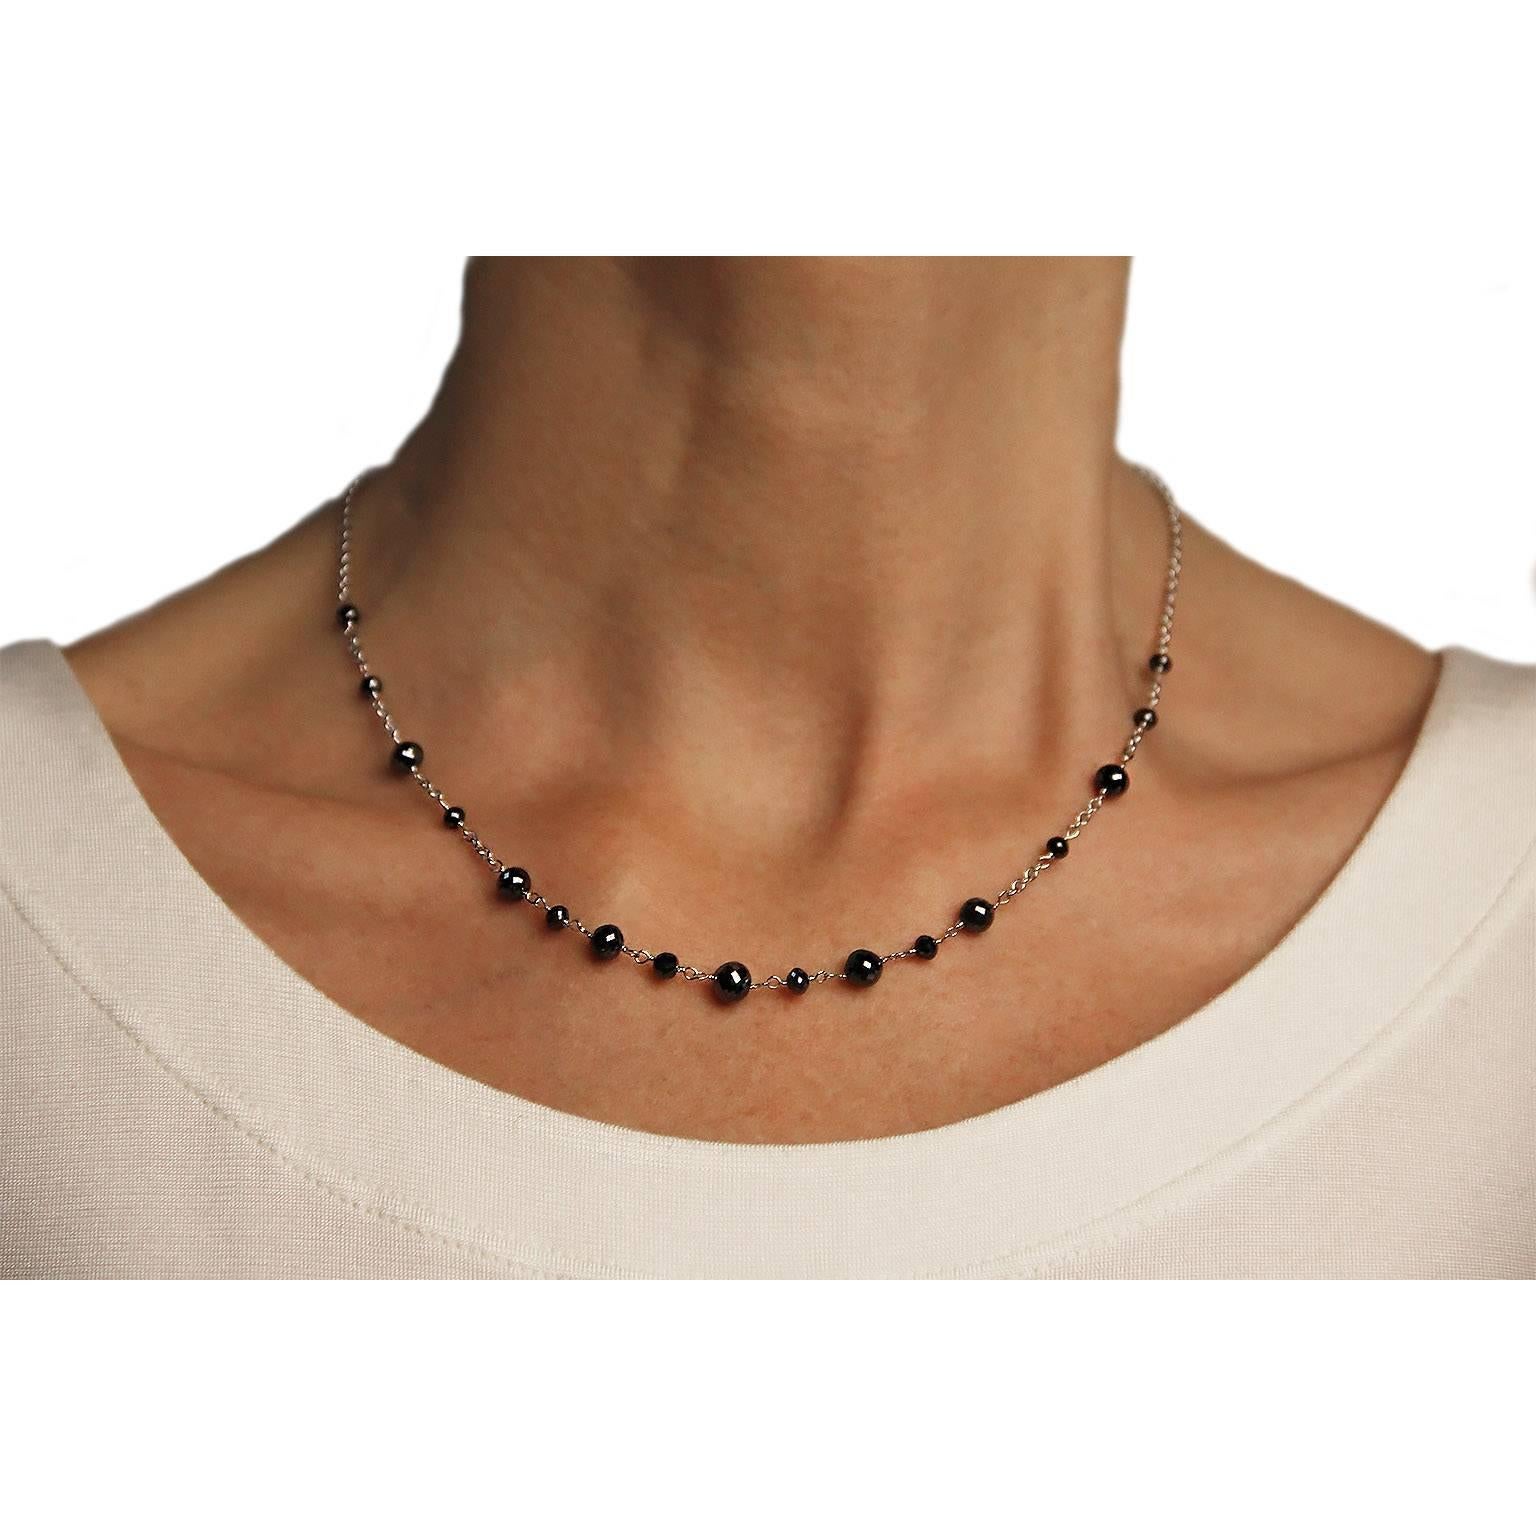 Jona design collection, hand crafted in Italy, 18 karat white gold, 18.11 in/46 cm long necklace with 17 briolette cut black diamonds weighing 14.10 carats in total.

All Jona jewelry is new and has never been previously owned or worn.

